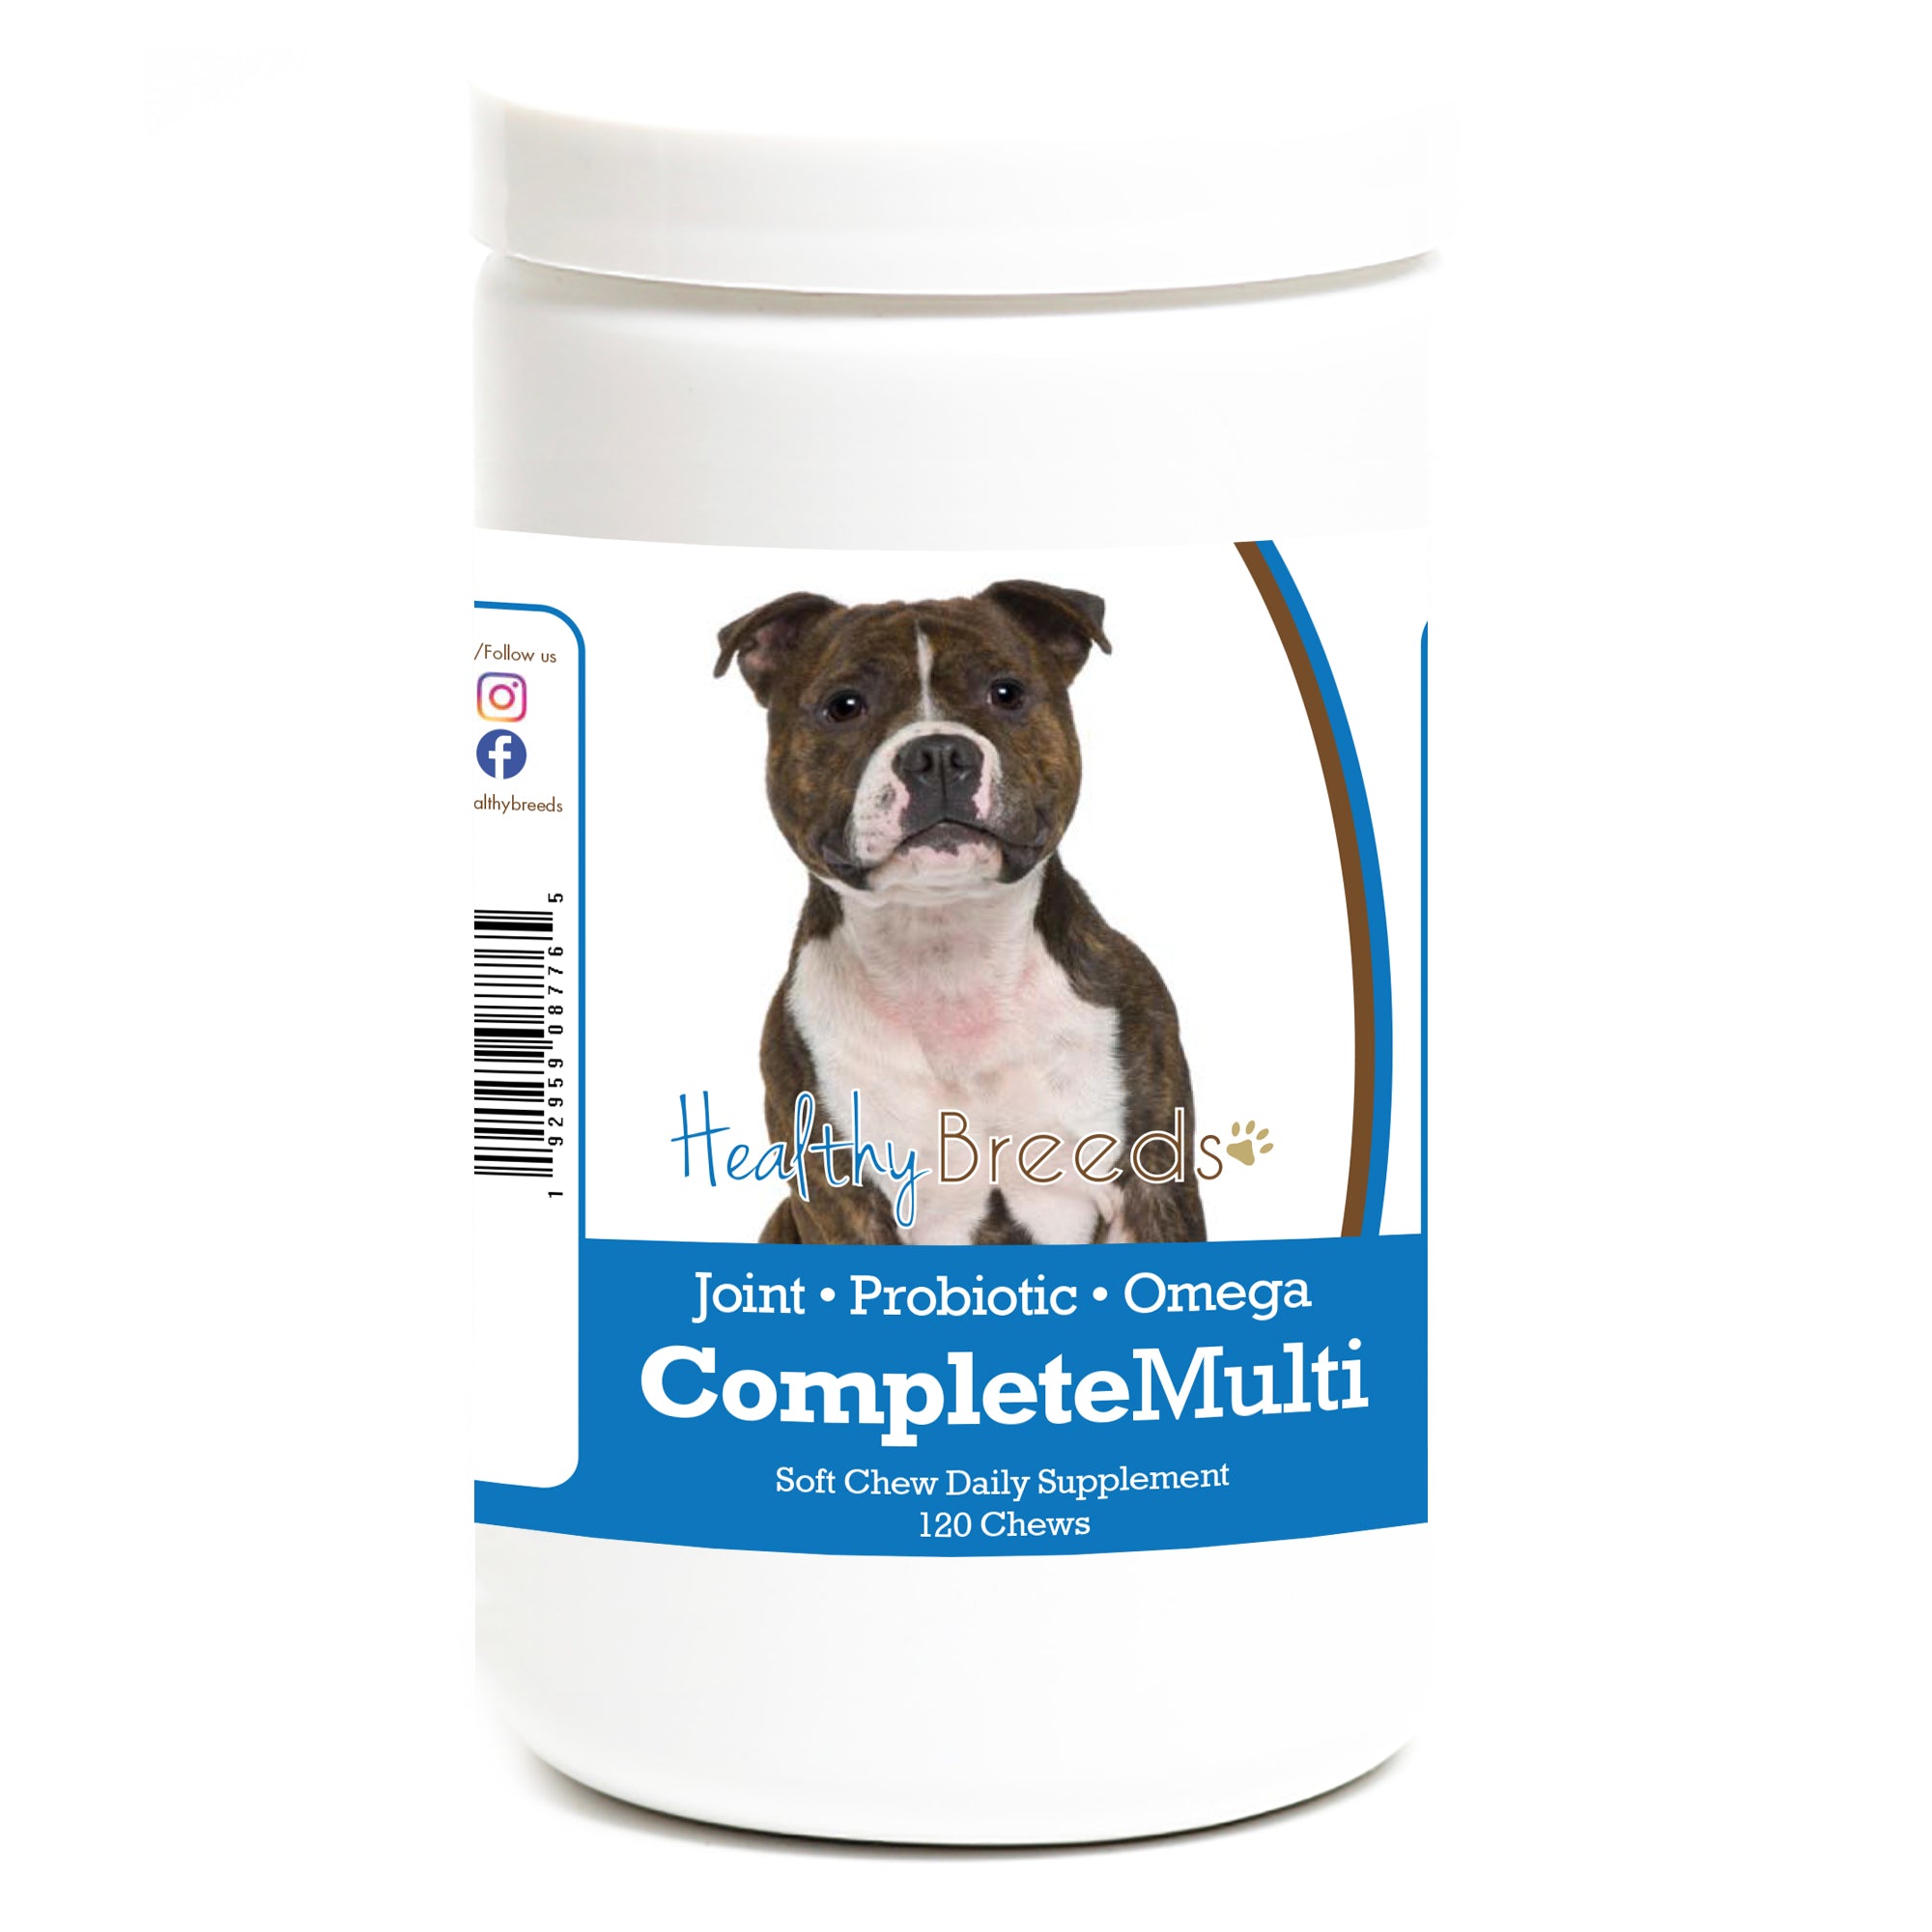 Staffordshire Bull Terrier All In One Multivitamin Soft Chew 120 Count